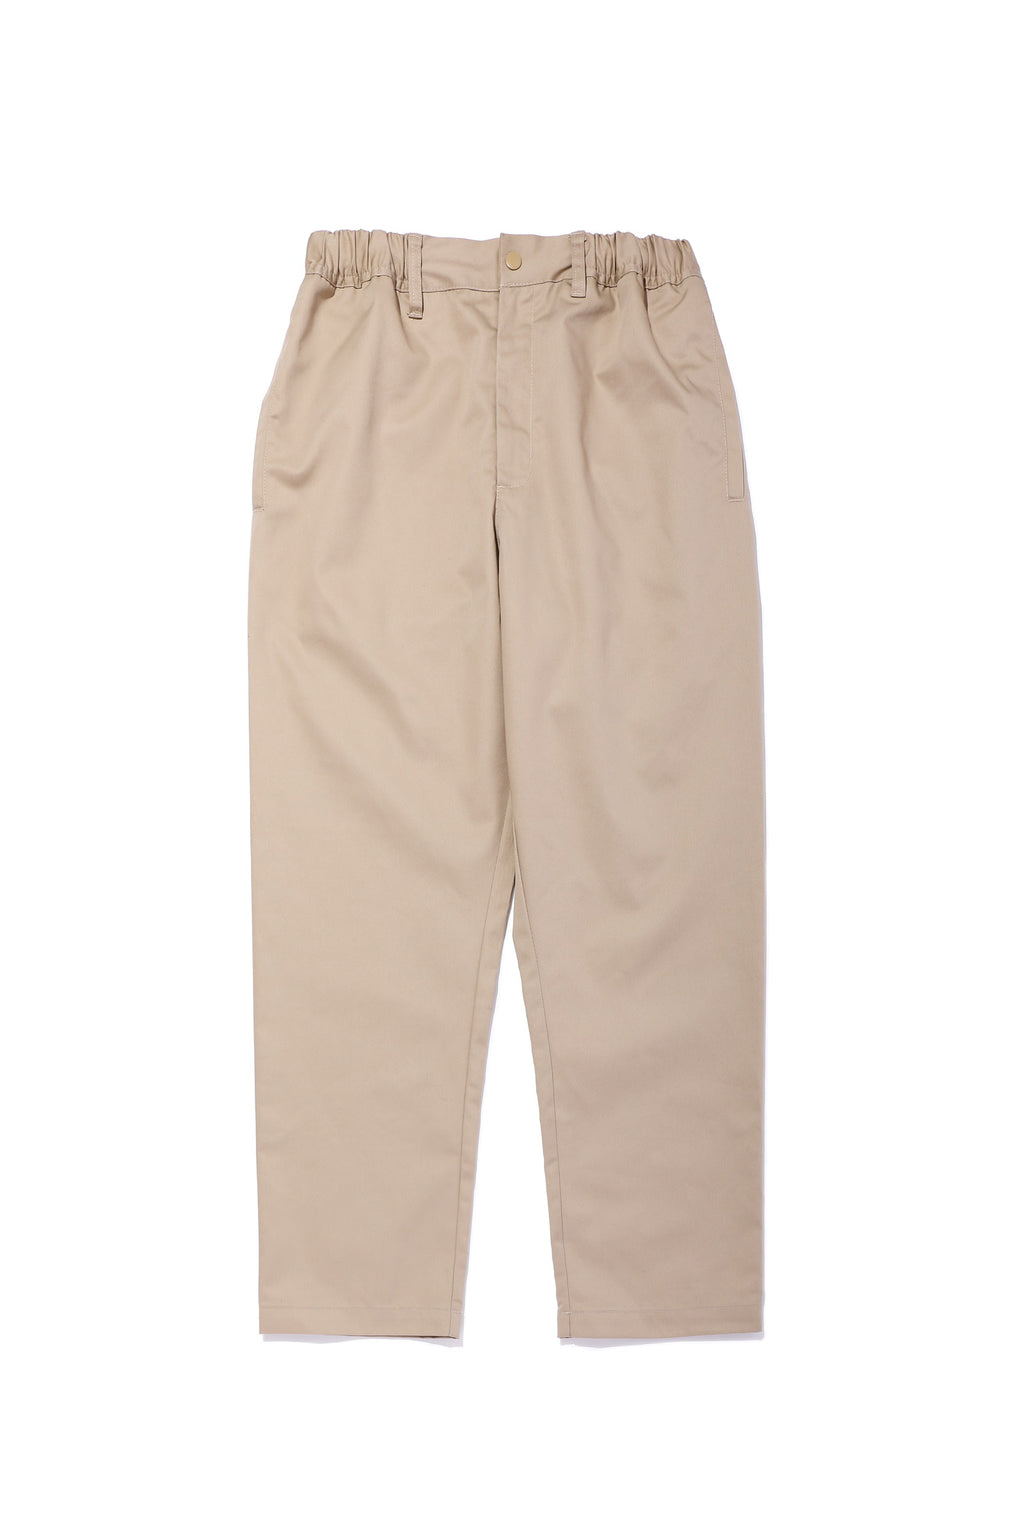 21SCS-WS-b.wire Pants / BEG